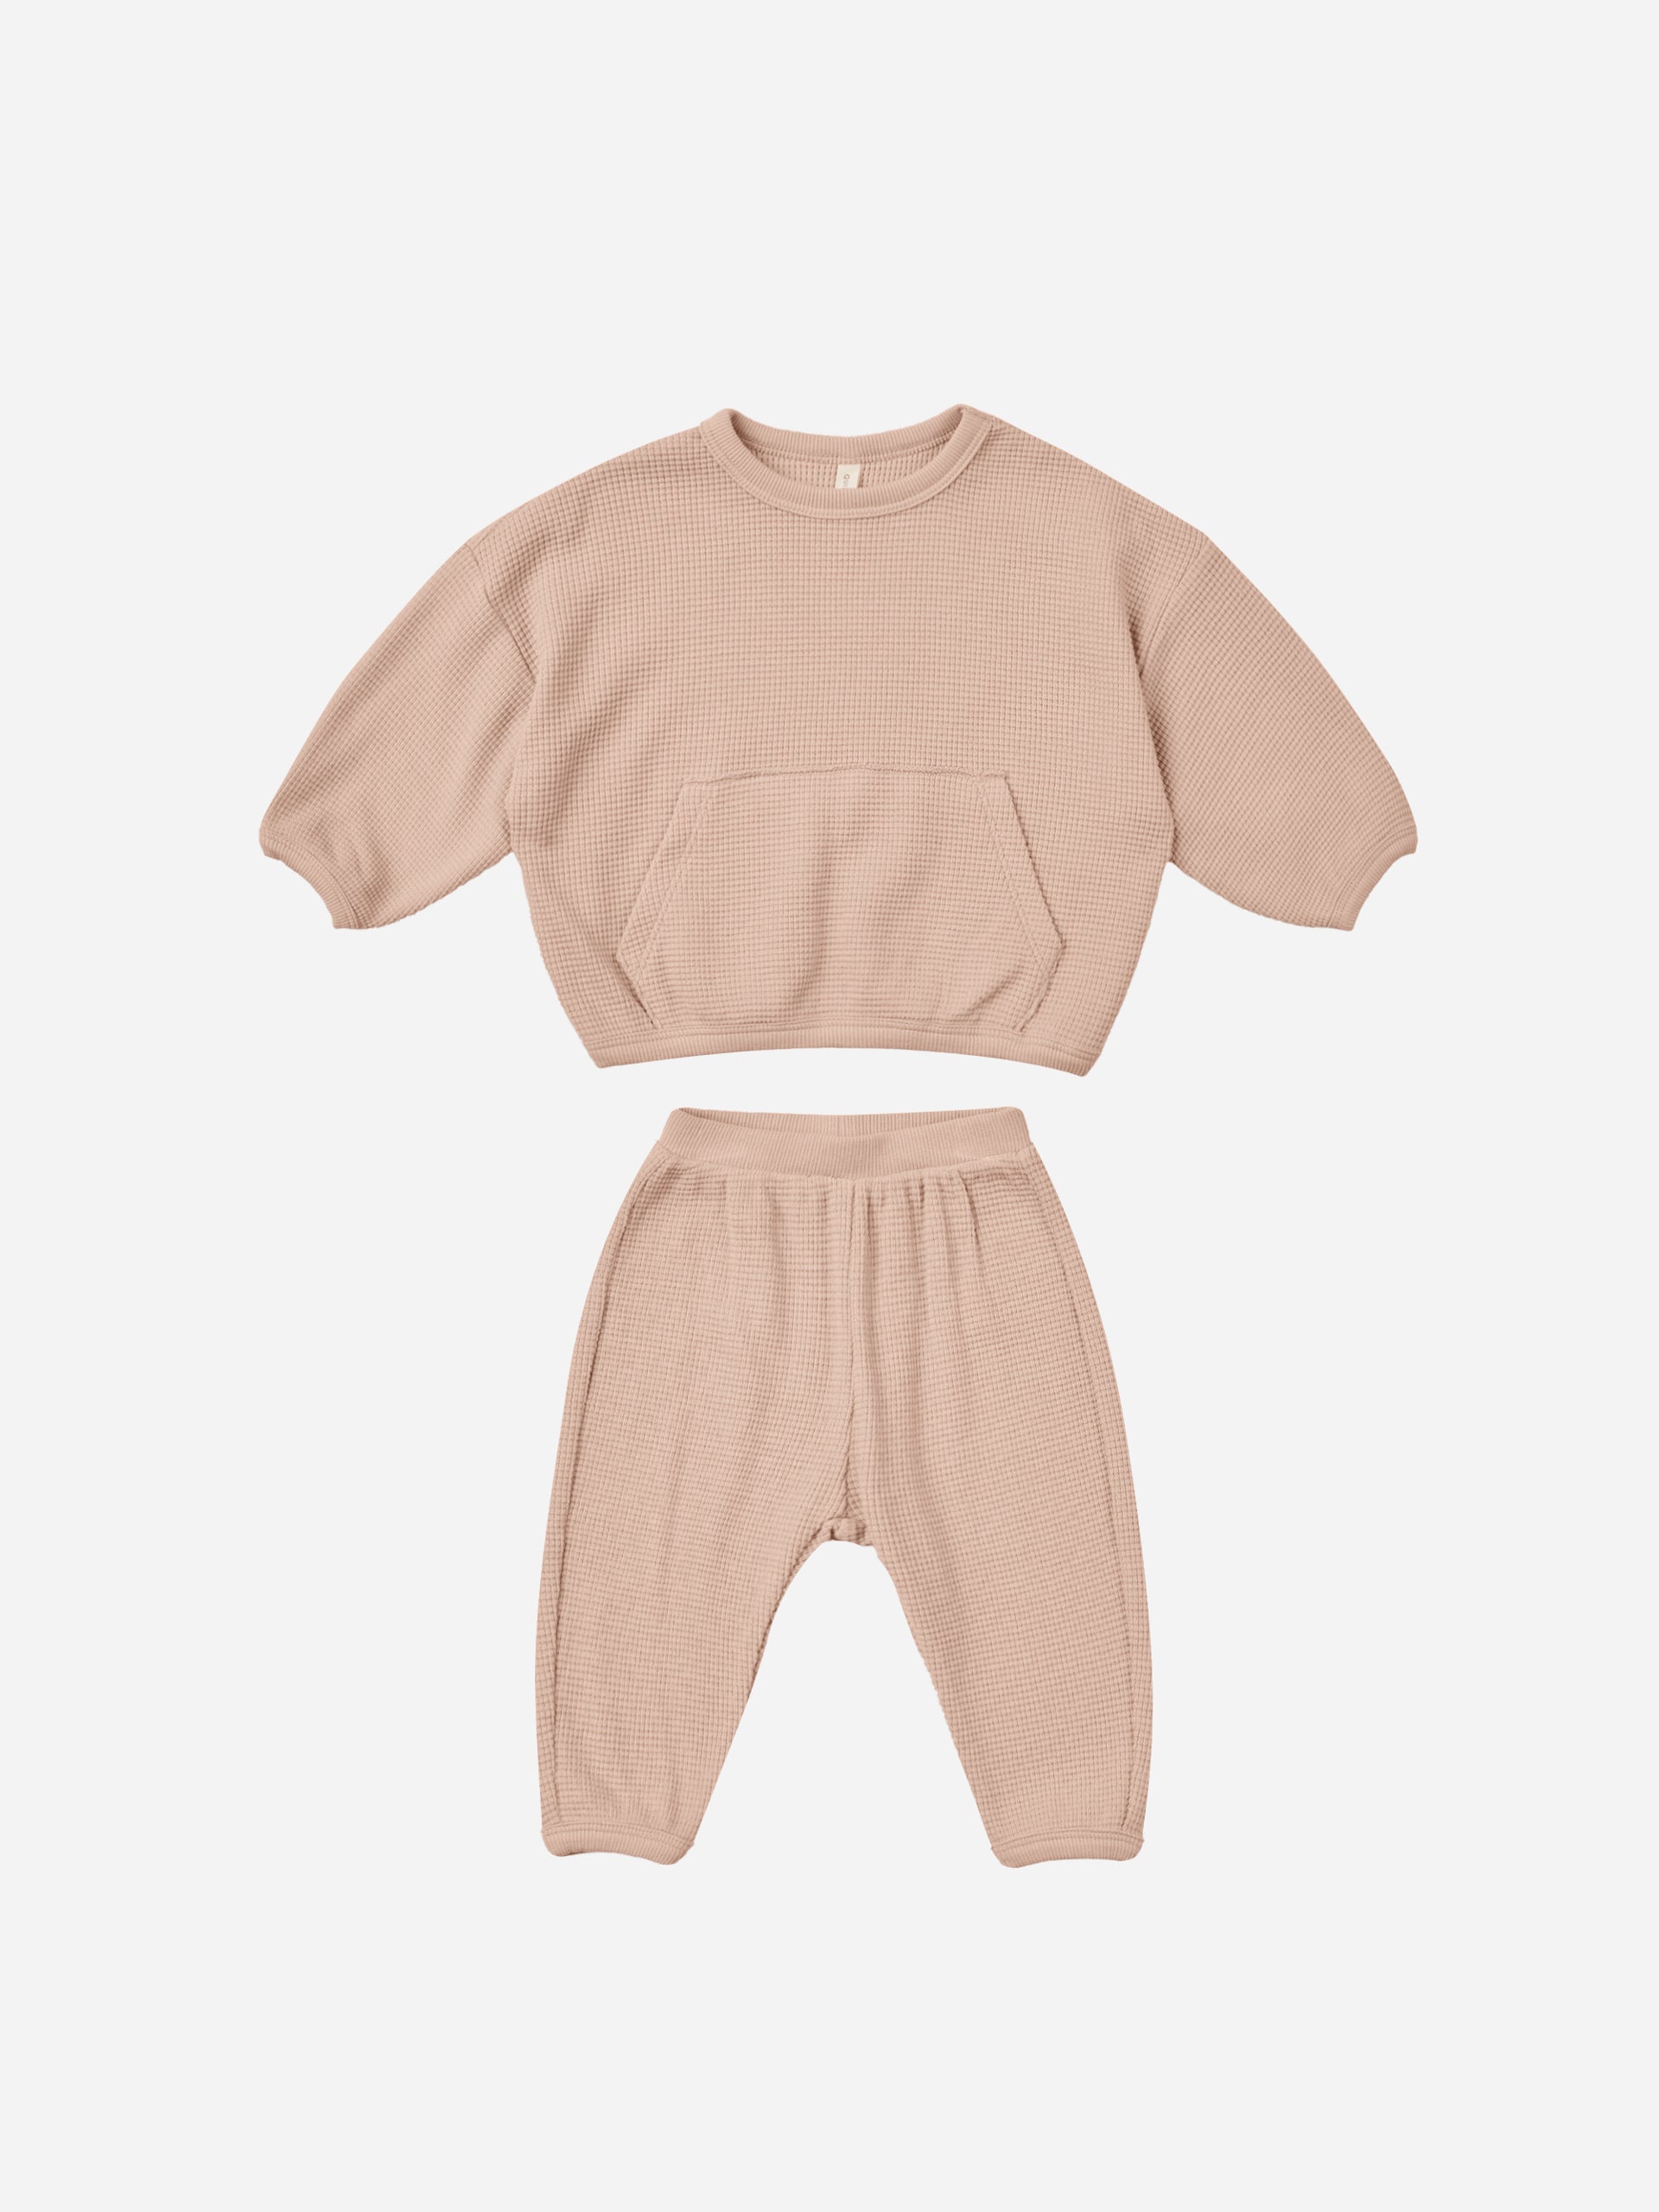 Waffle Slouch Set || Blush - Rylee + Cru | Kids Clothes | Trendy Baby Clothes | Modern Infant Outfits |